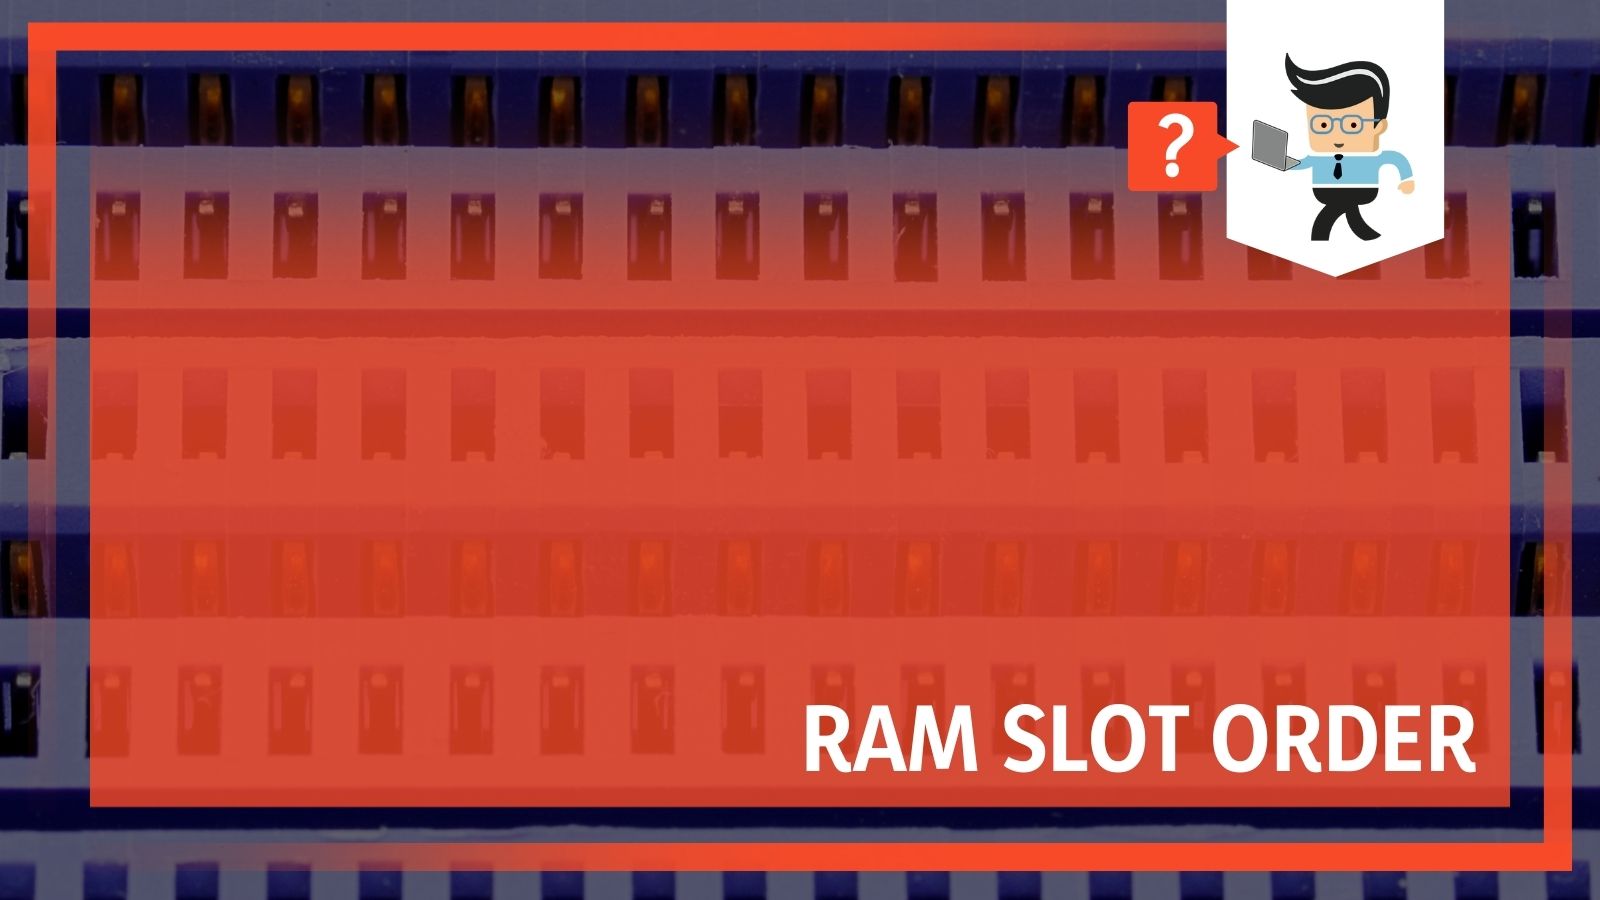 RAM Slot Order Make Sure You Know the Difference for PC, Mac, and Laptop Slots